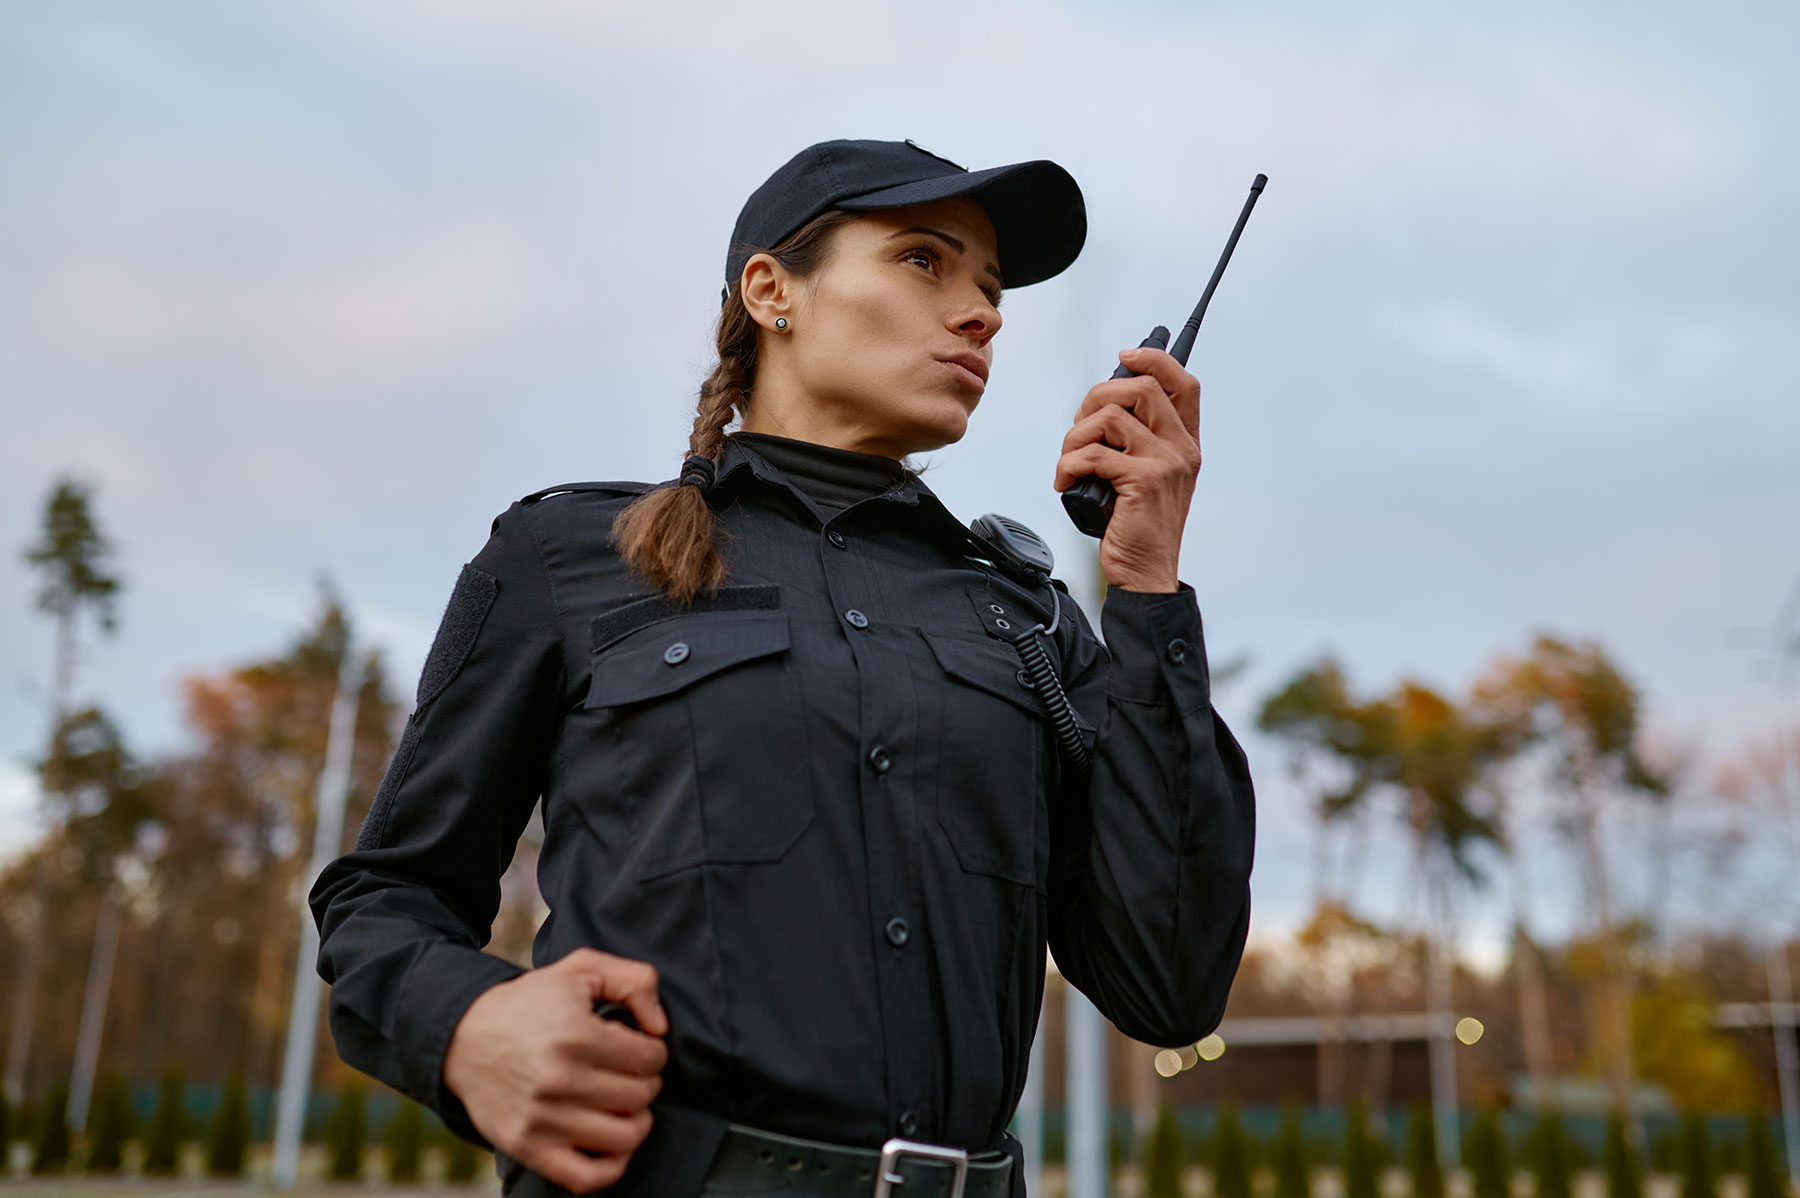 Woman security guard learning advanced concepts for security professionals